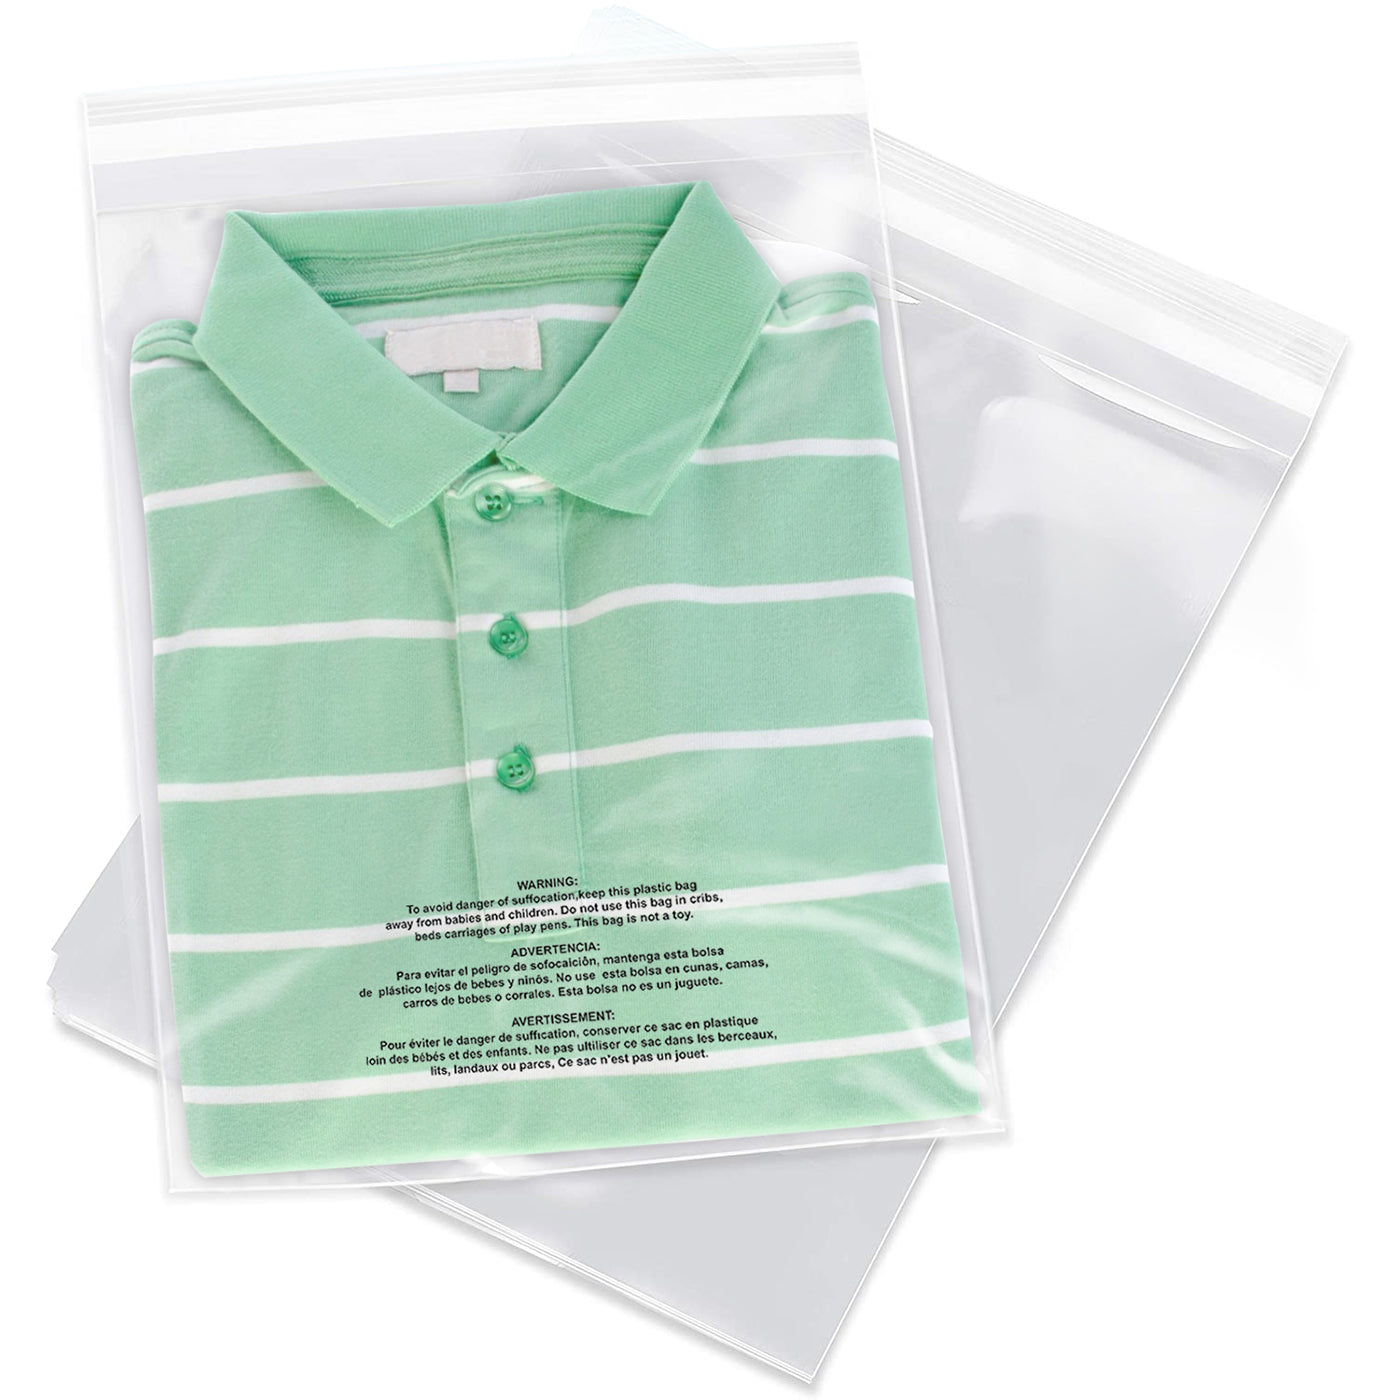 Imailer 12" x 15" Self Seal 1.6 Mil Clear Plastic Poly Bags with Suffocation Warning